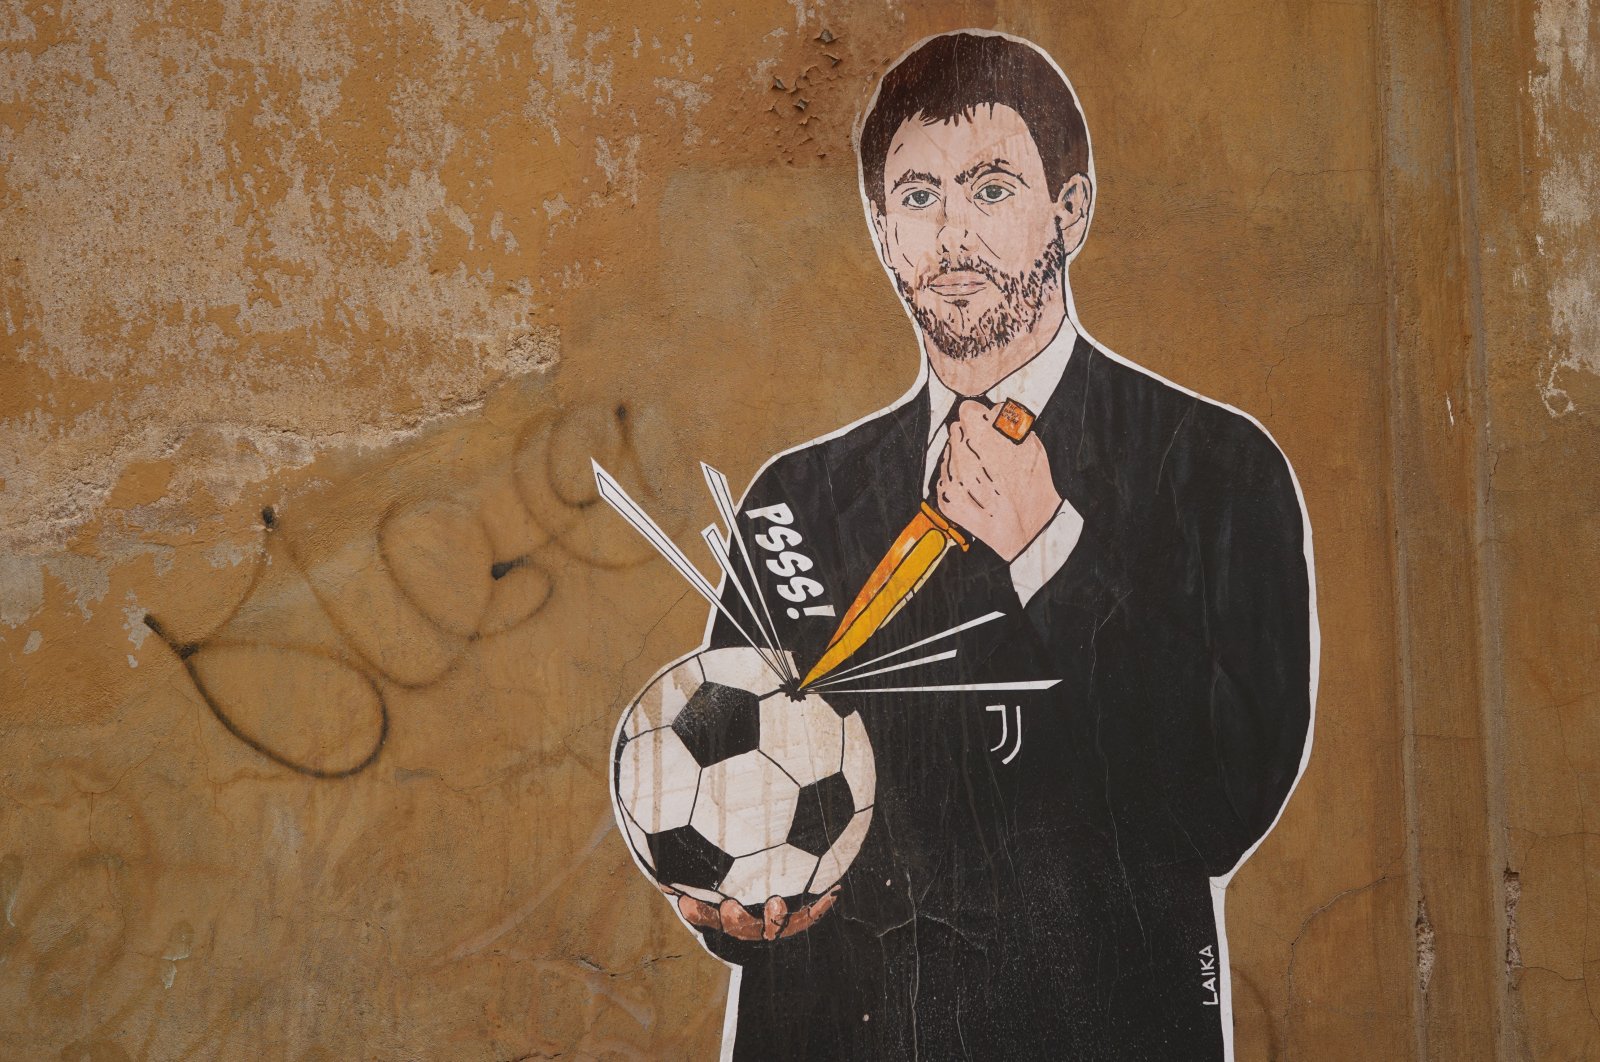 A mural depicting Juventus president Andrea Agnelli making a hole in a football with a knife in Rome, April 22, 2021. (AP Photo)